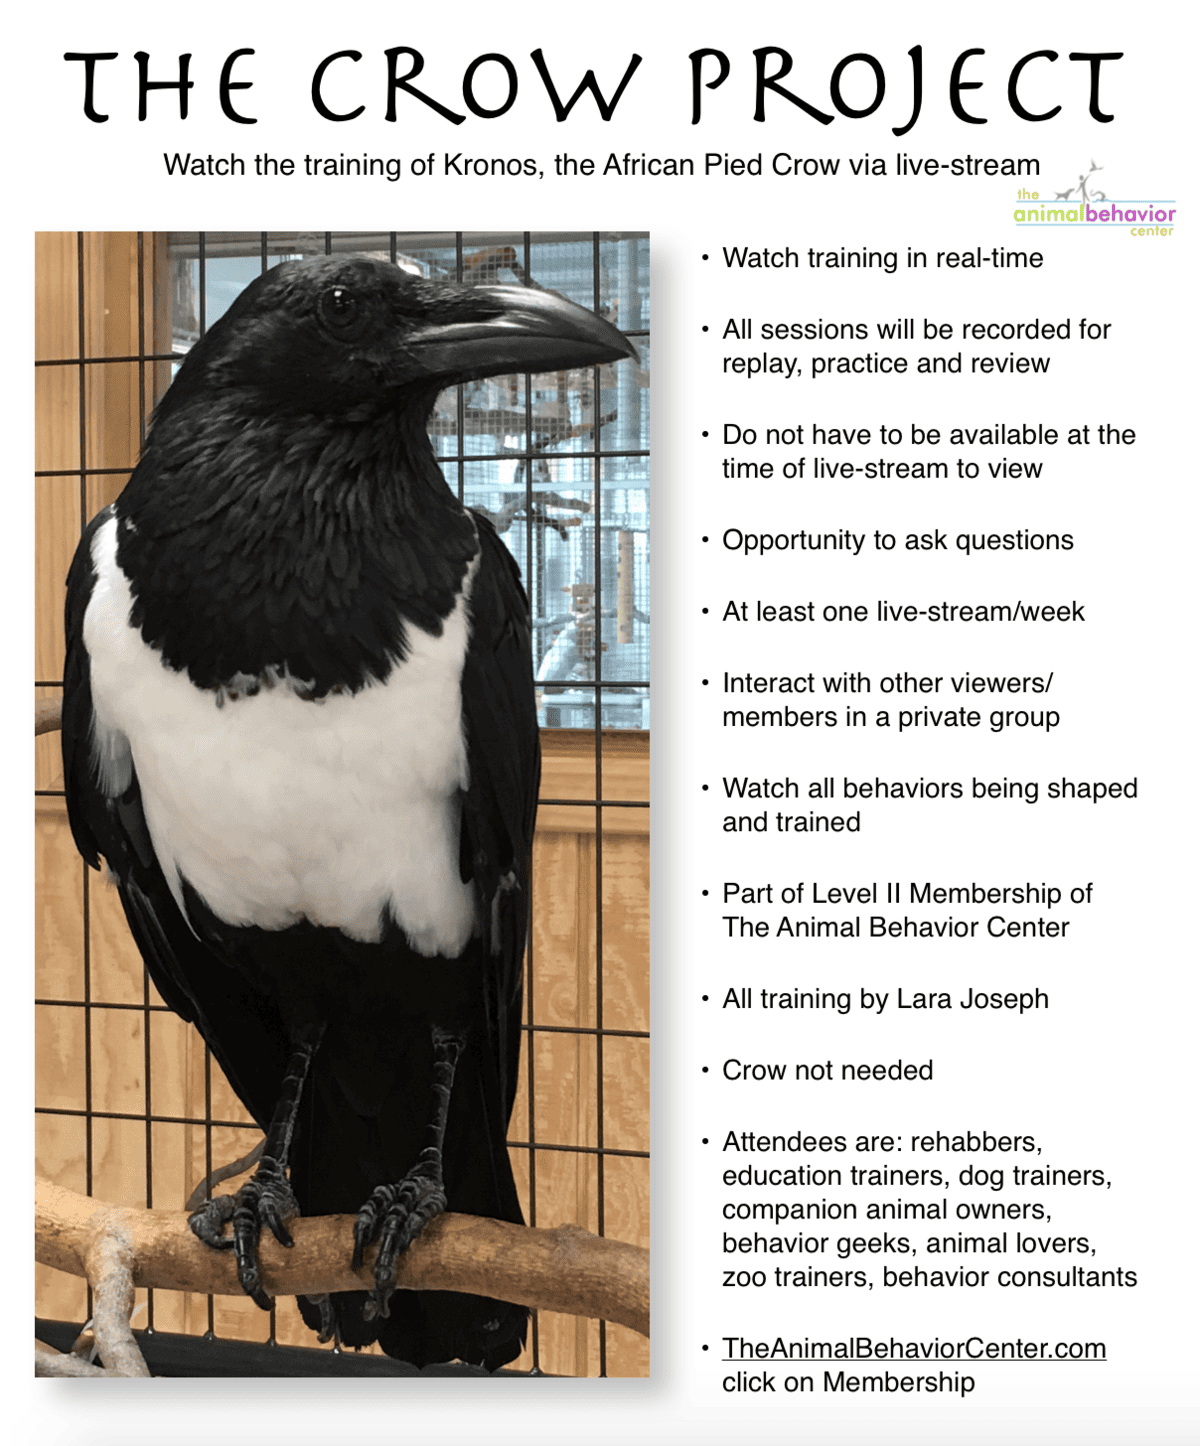 The Crow Project-2 - The Animal Behavior Center